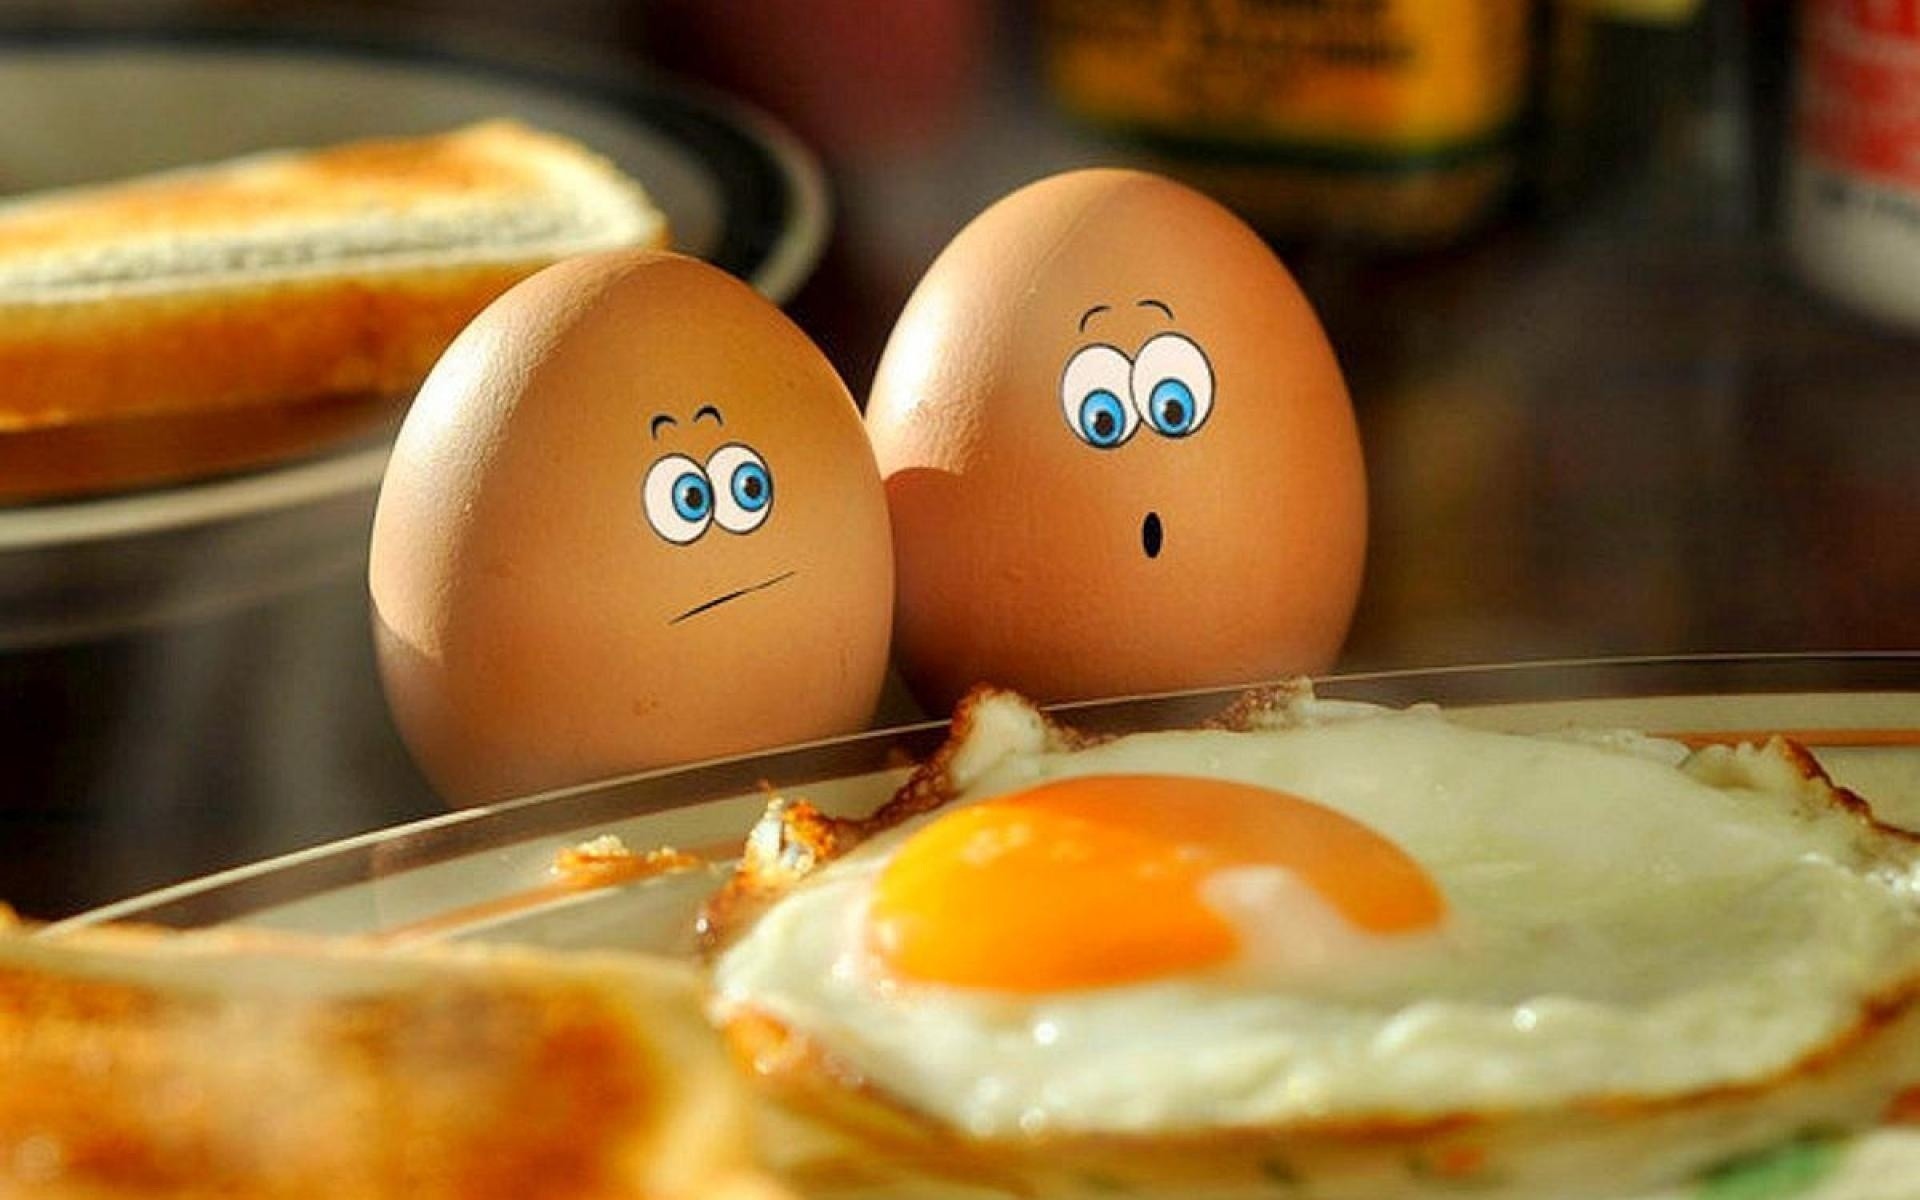 black humor egg breakfast food egg yolk cooking dawn meal bread chicken nutrition cholesterol delicious toast baking lunch traditional homemade plate table